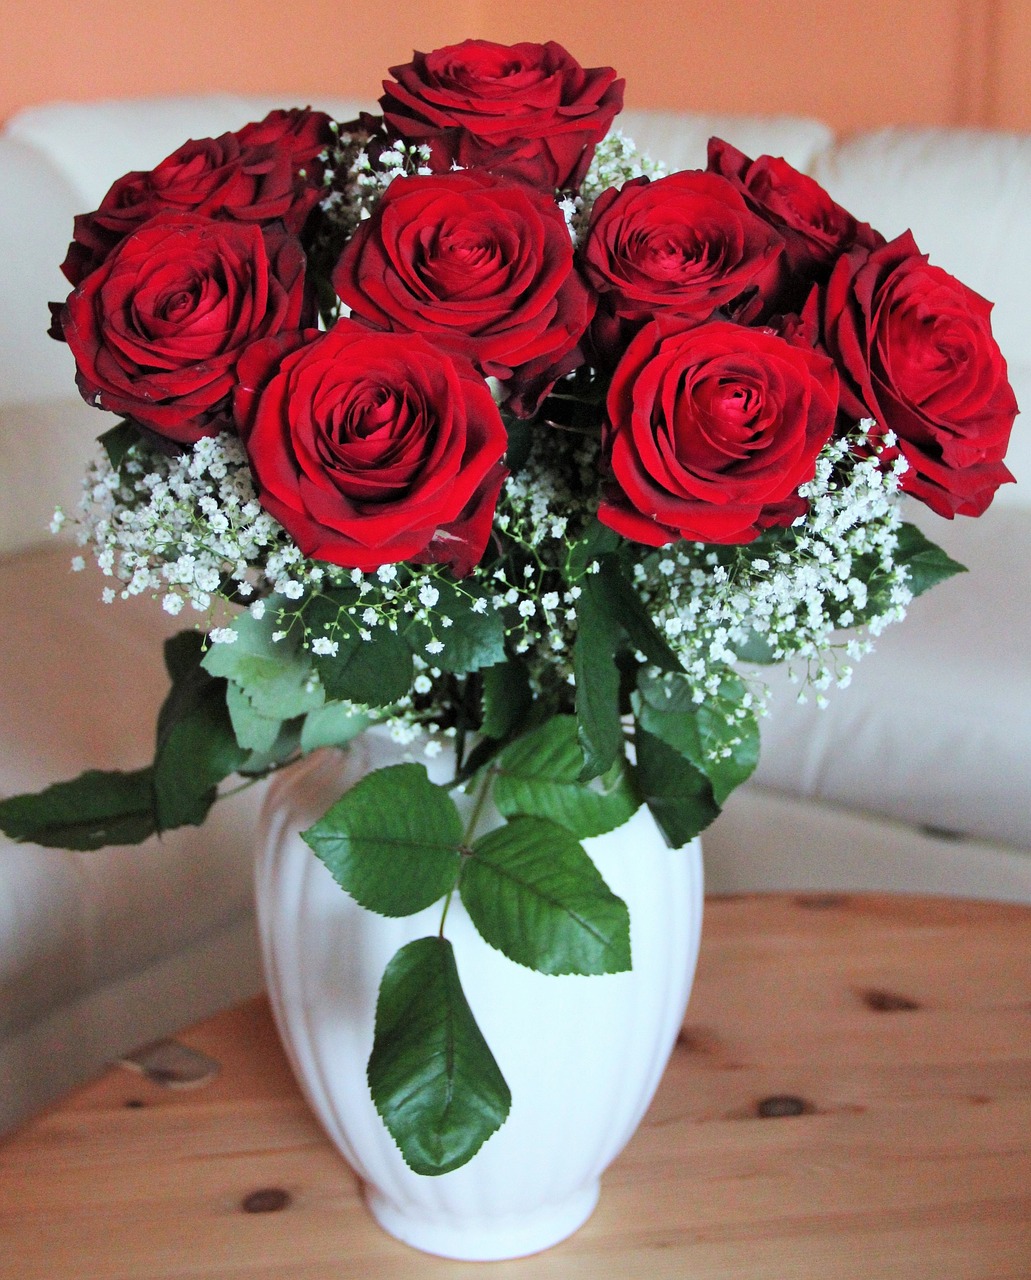 Bouquet of roses,baccara roses,he loved flowers,queen of roses,red roses - free image from needpix.com